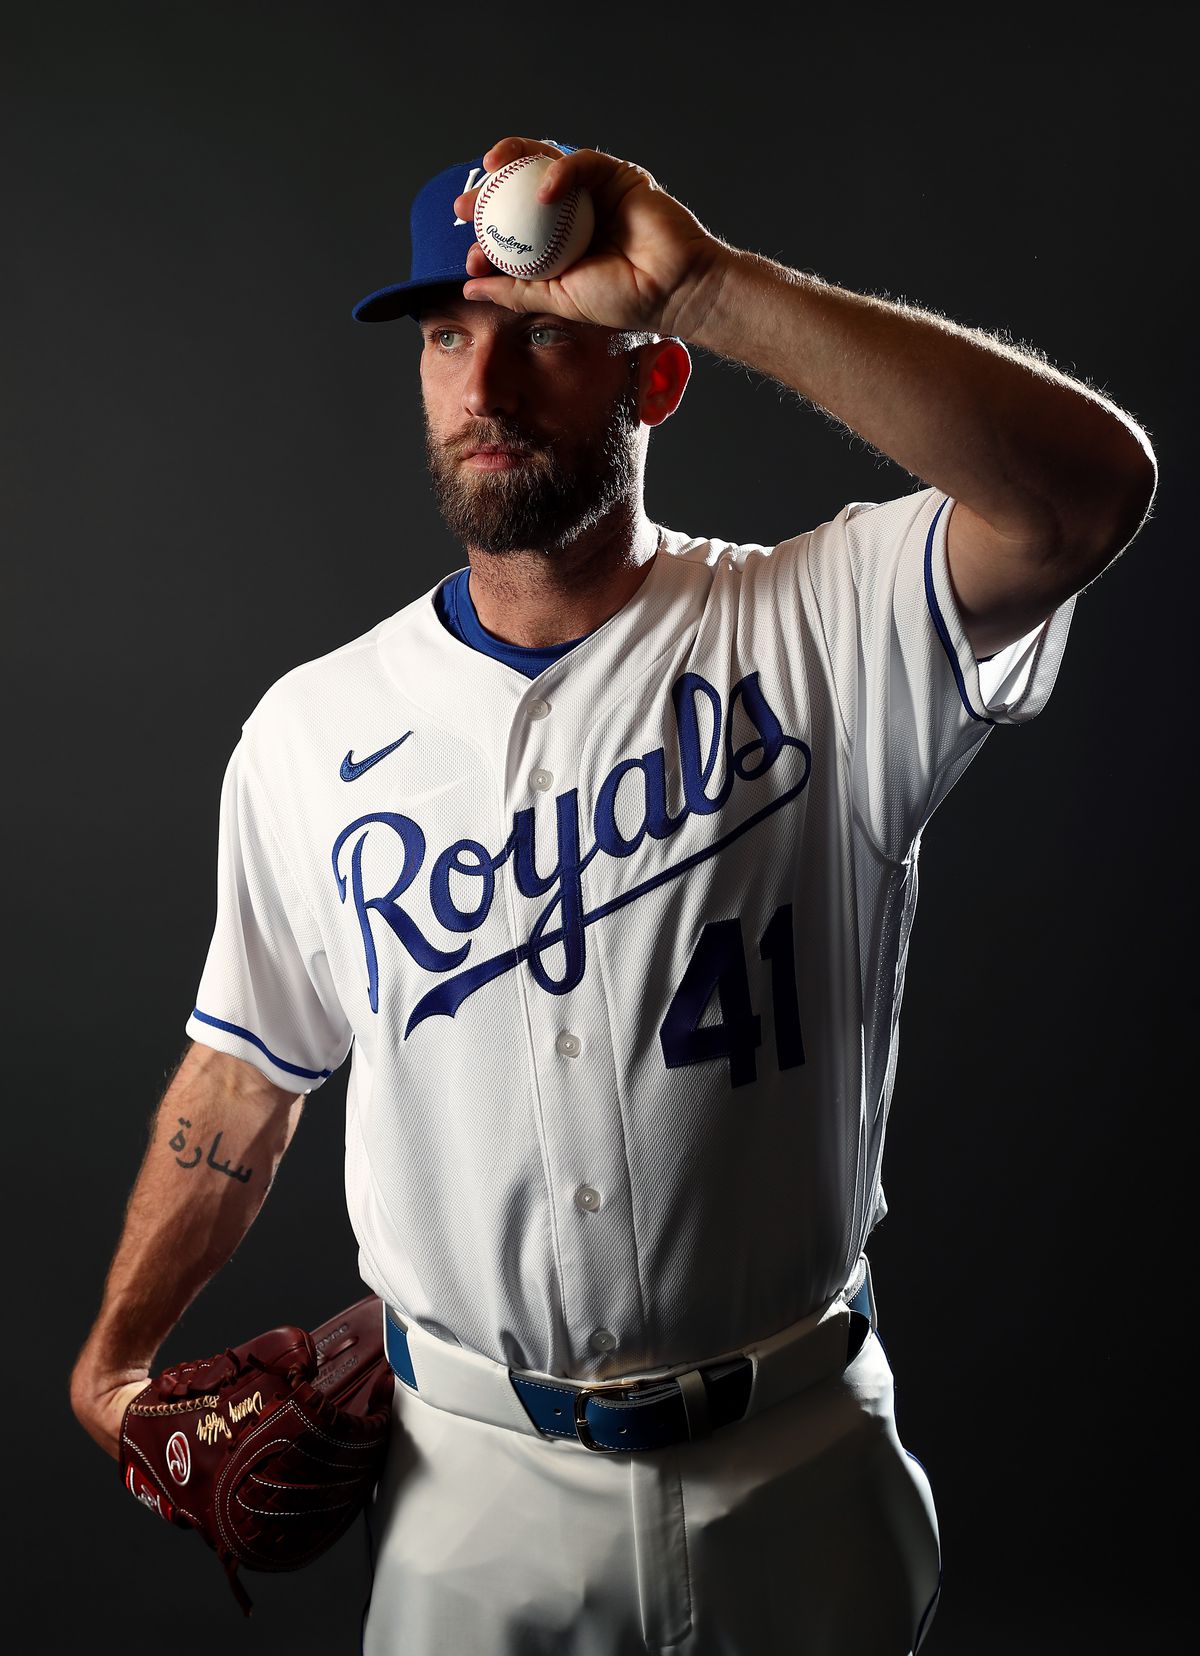 Danny Duffy #41 of the Kansas City Royals poses during Kansas City Royals Photo Day on February 20, 2020 in Surprise, Arizona.